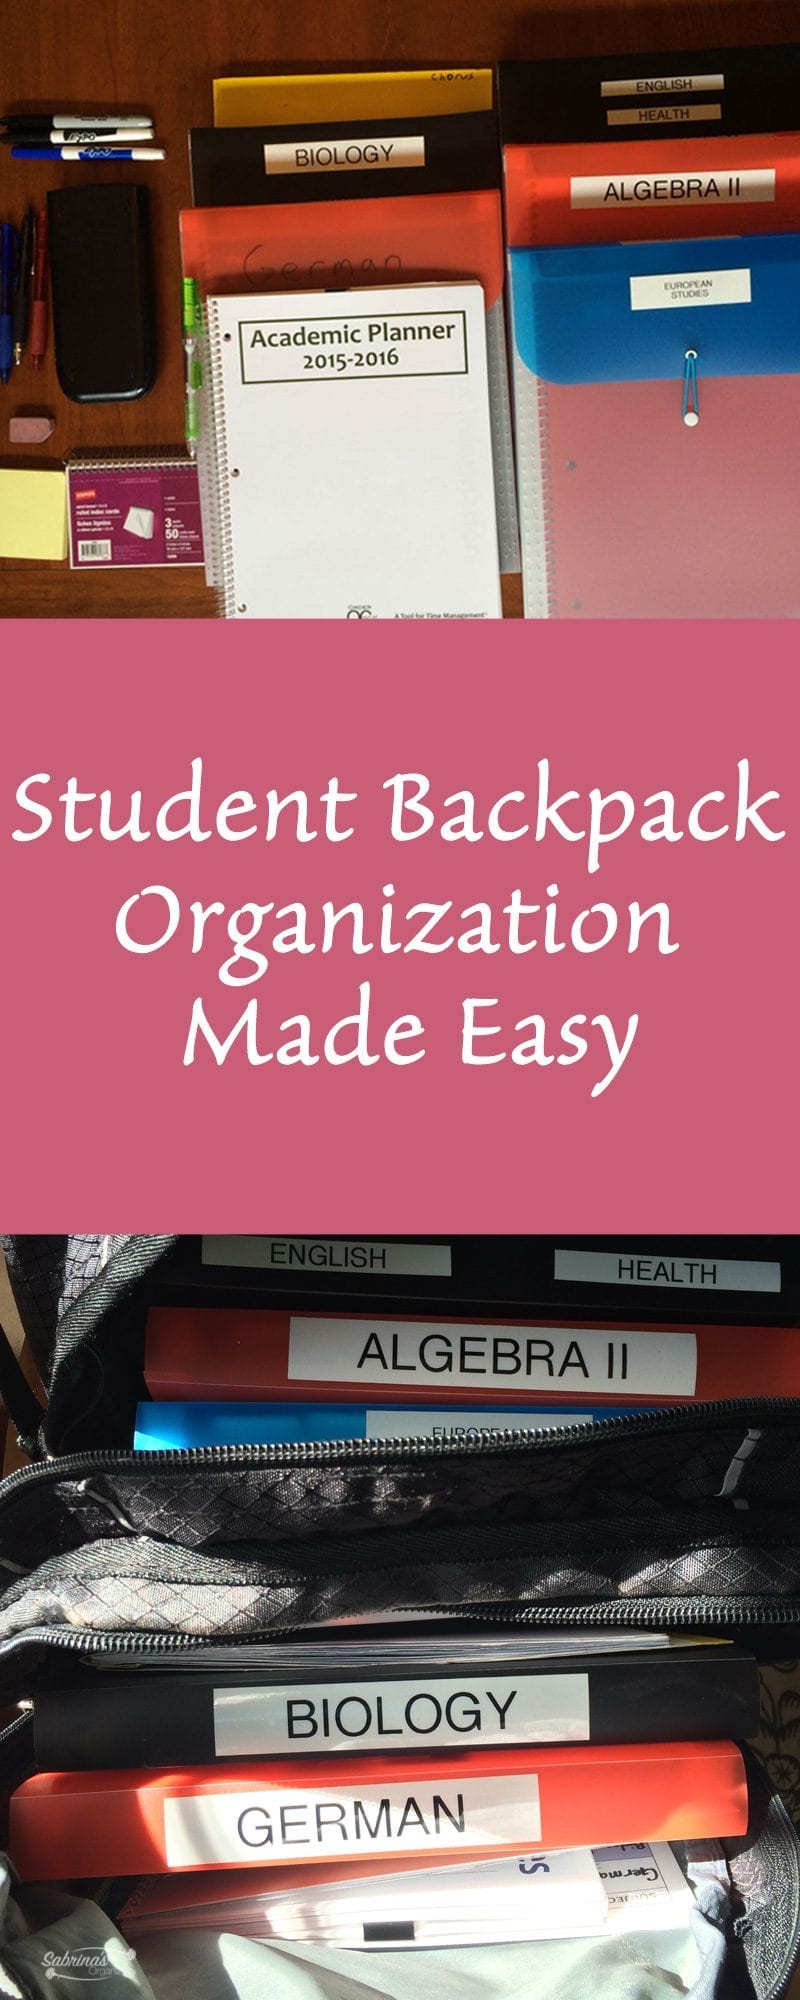 Student Backpack Organization Made Easy